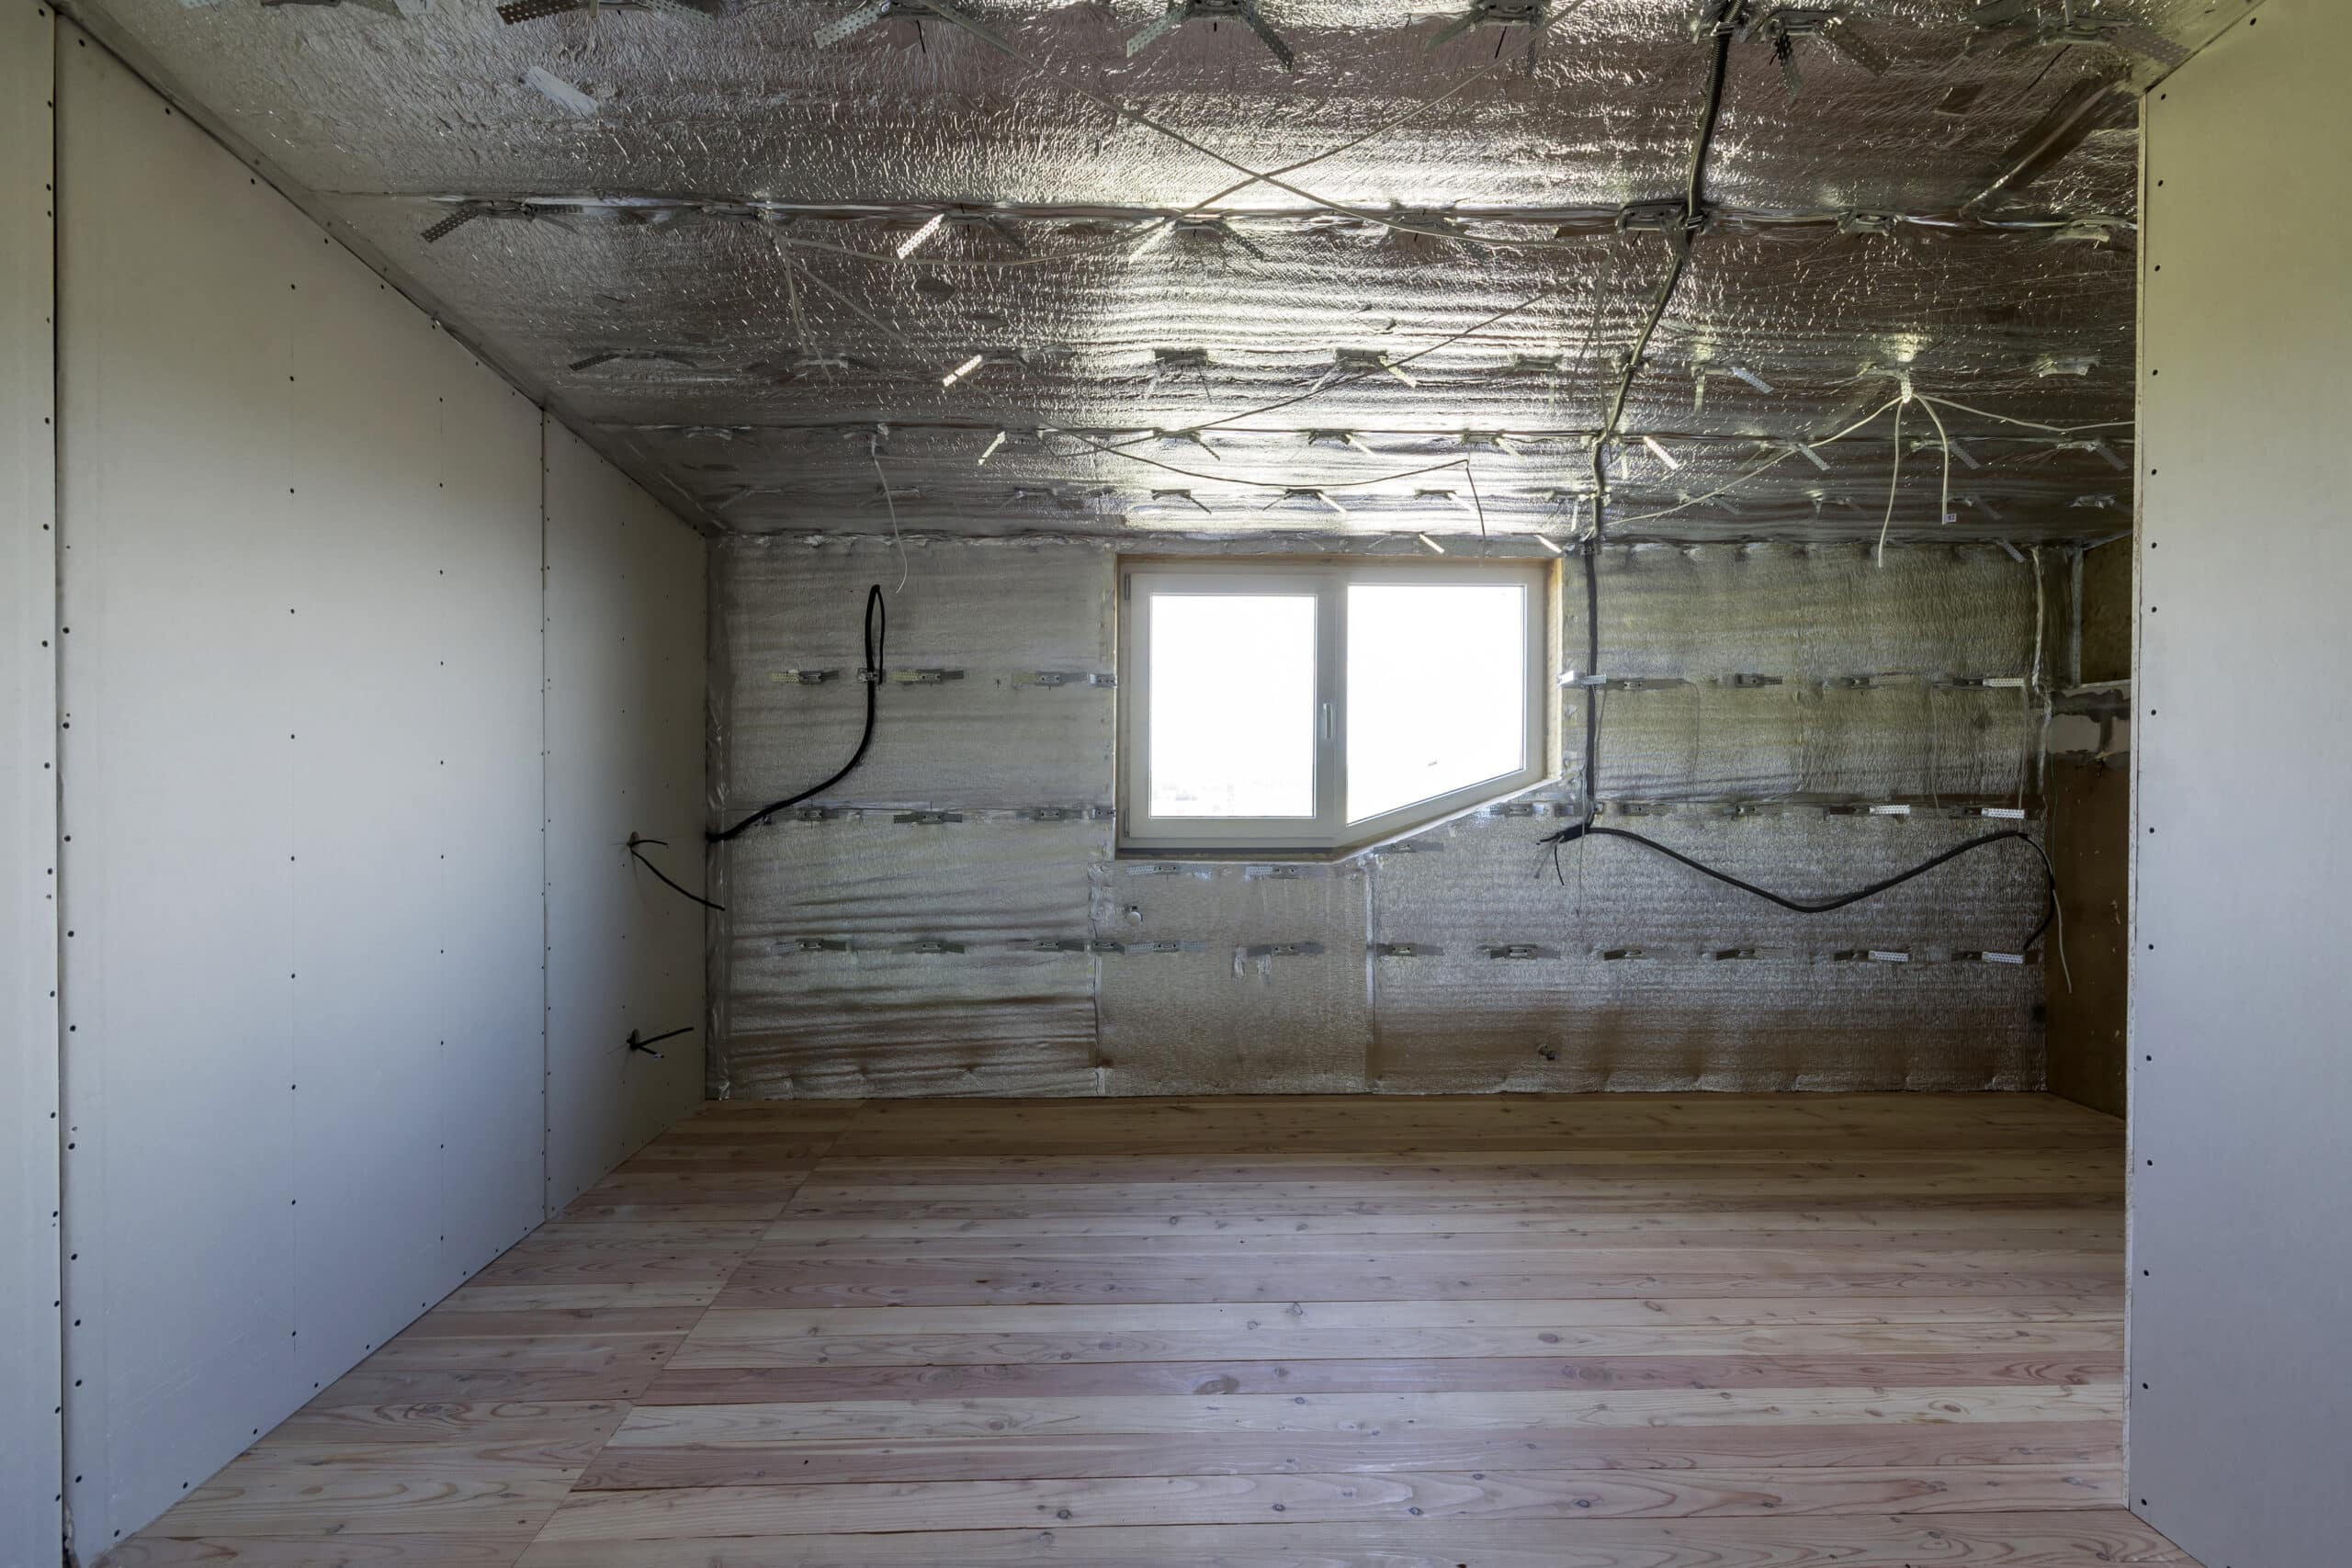 Insulation Installation - How To Keep an Old Drafty House Warm graphic